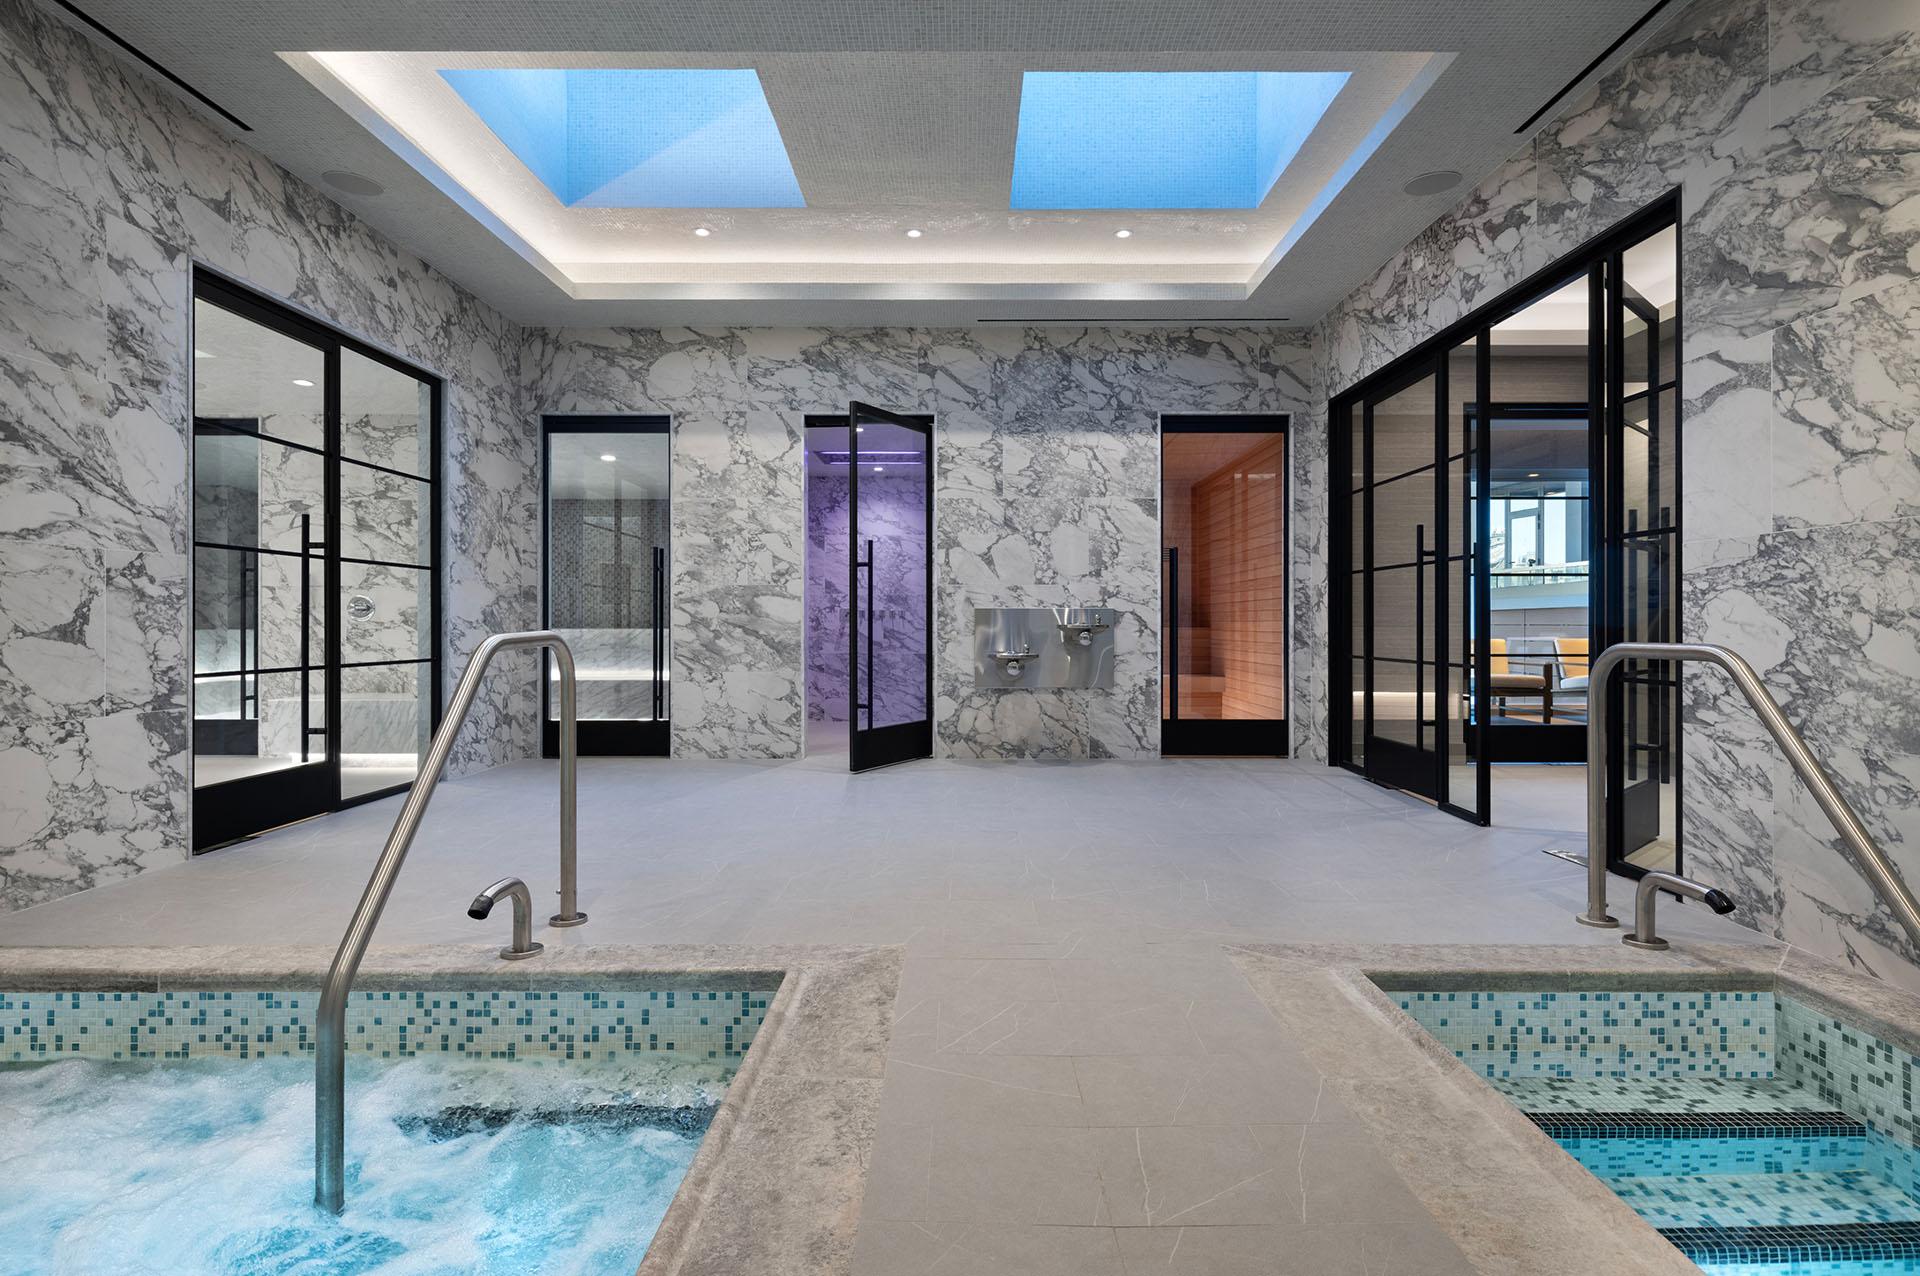 Spa Hot tub and Cold Plunge Pools